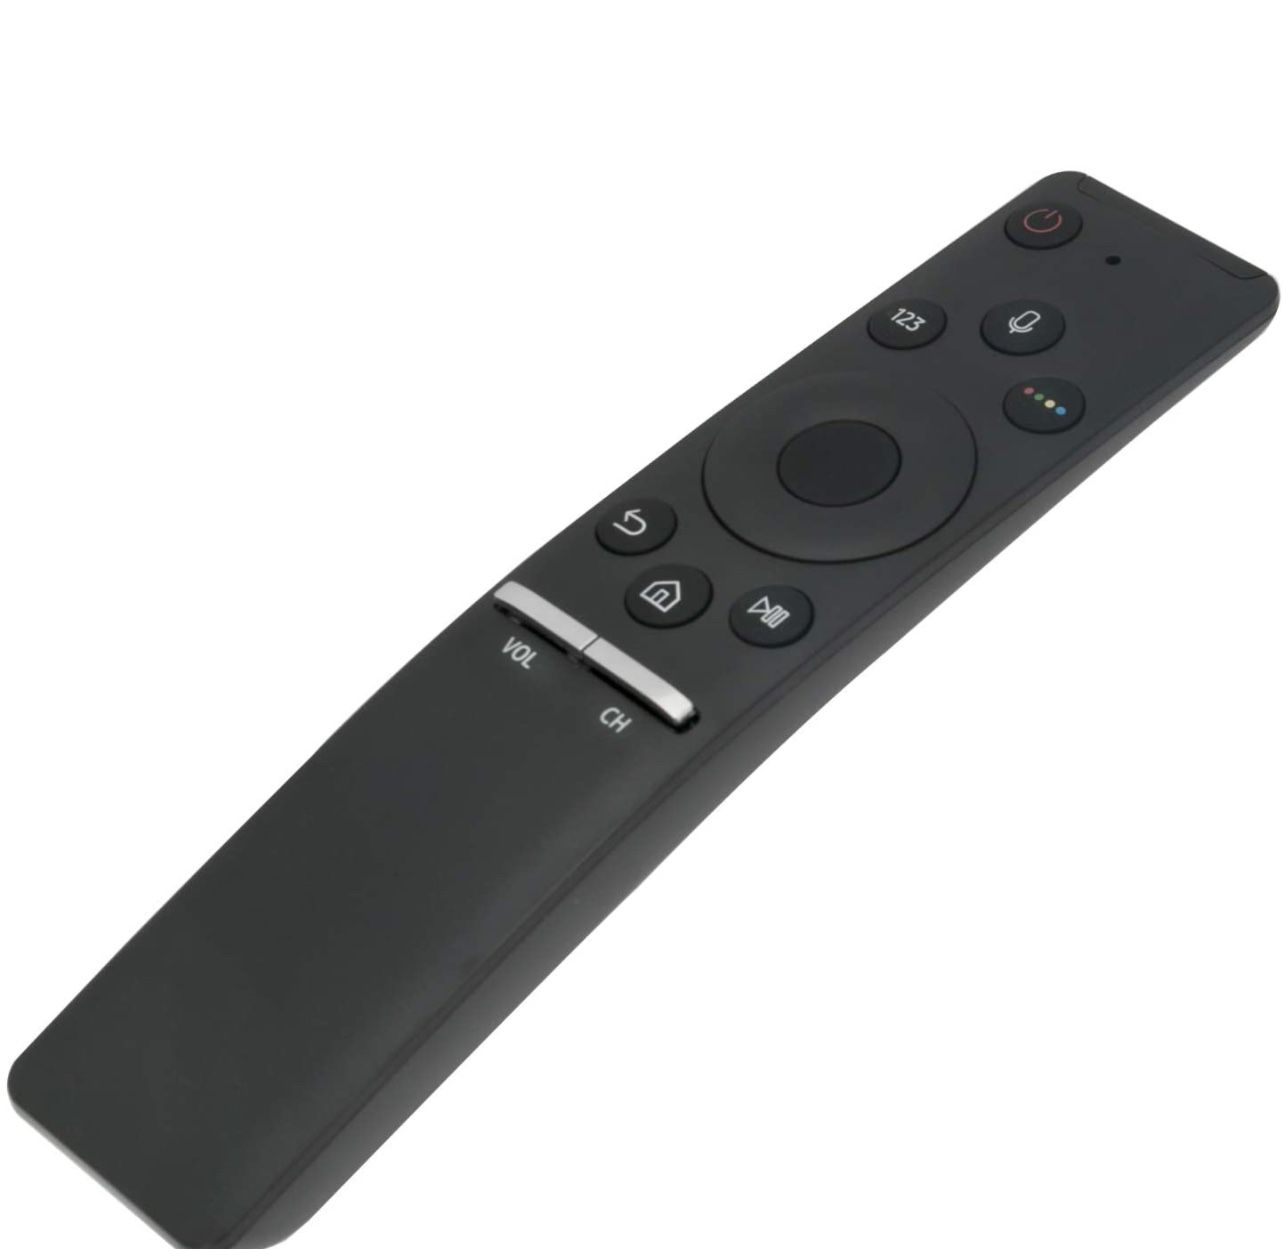 BN59-01266A Replaced Voice Remote fit for Samsung Smart 4K TV BNA RMCSPM1AP1 QN65Q7FD UN75MU630D UN50MU630D UN65MU850D UN43MU630D UN55MU630D UN